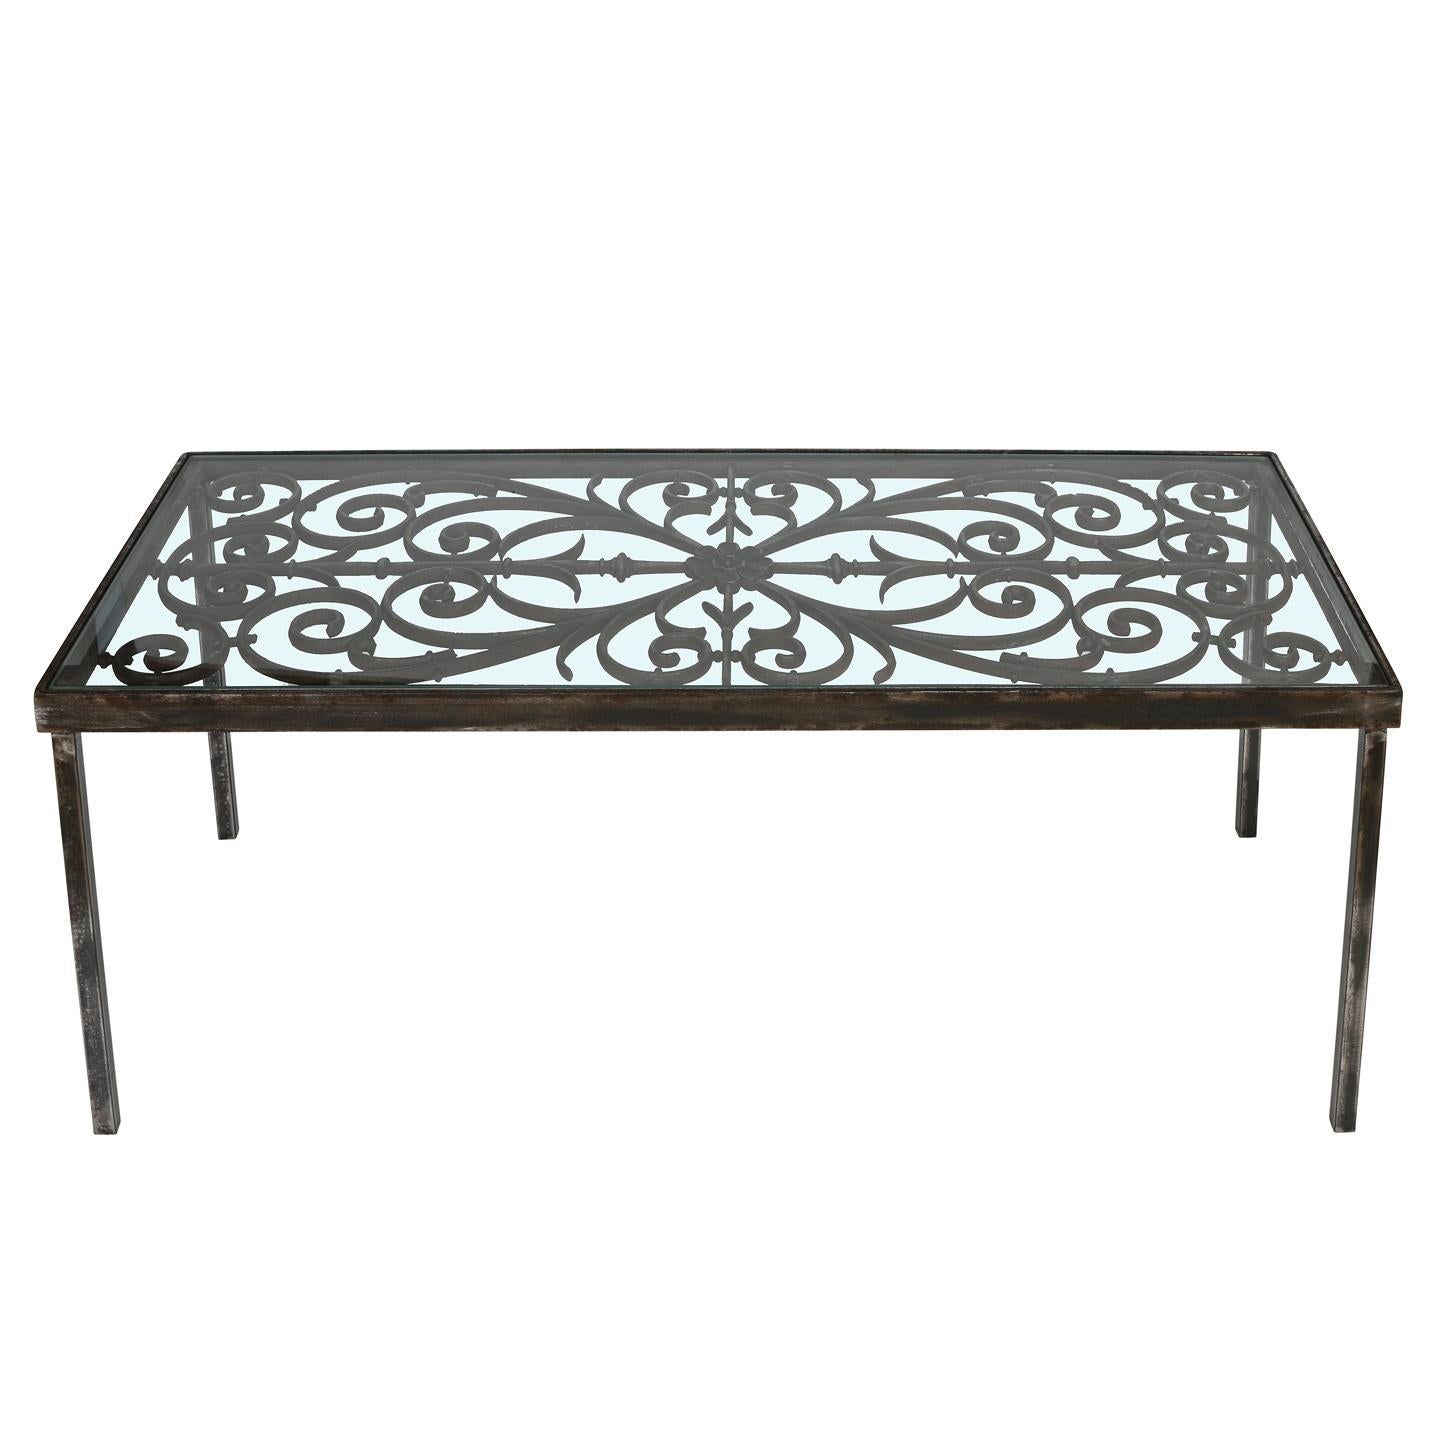 This cocktail table is somewhat rustic yet refined at the same time.  The base is wrought iron, featuring a lovely scrolled and floral design, and the top is clear glass.  